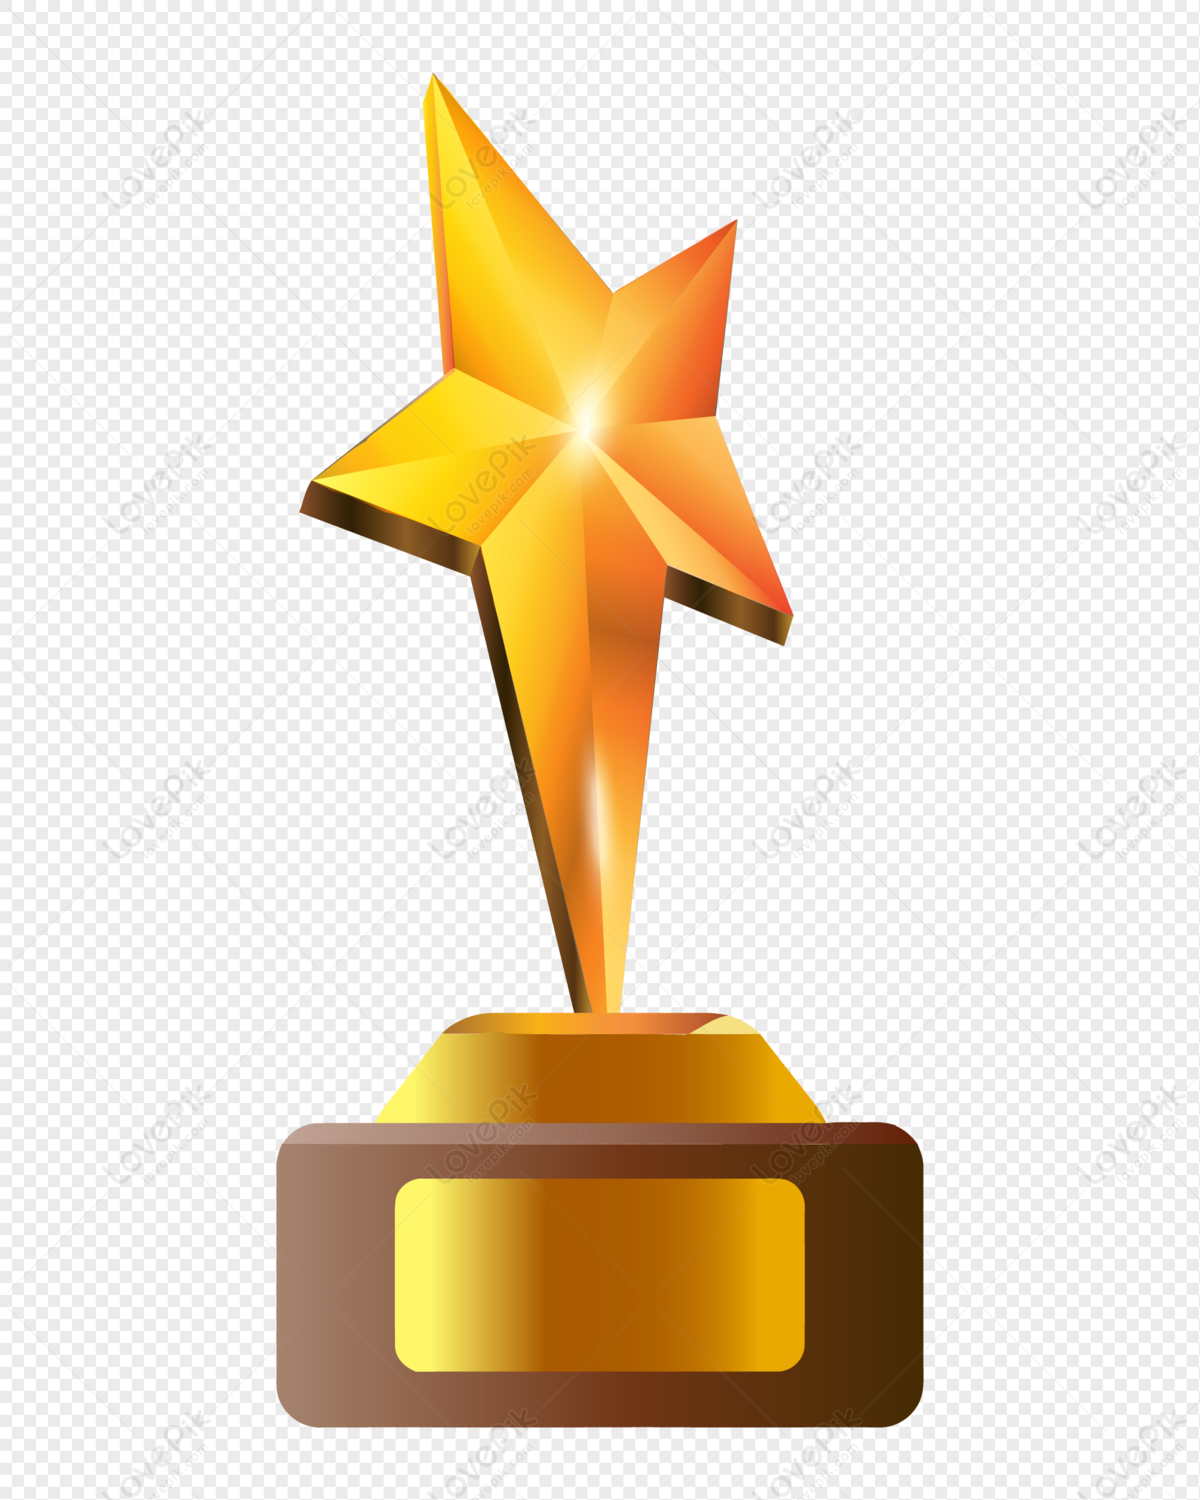 all star trophy clipart